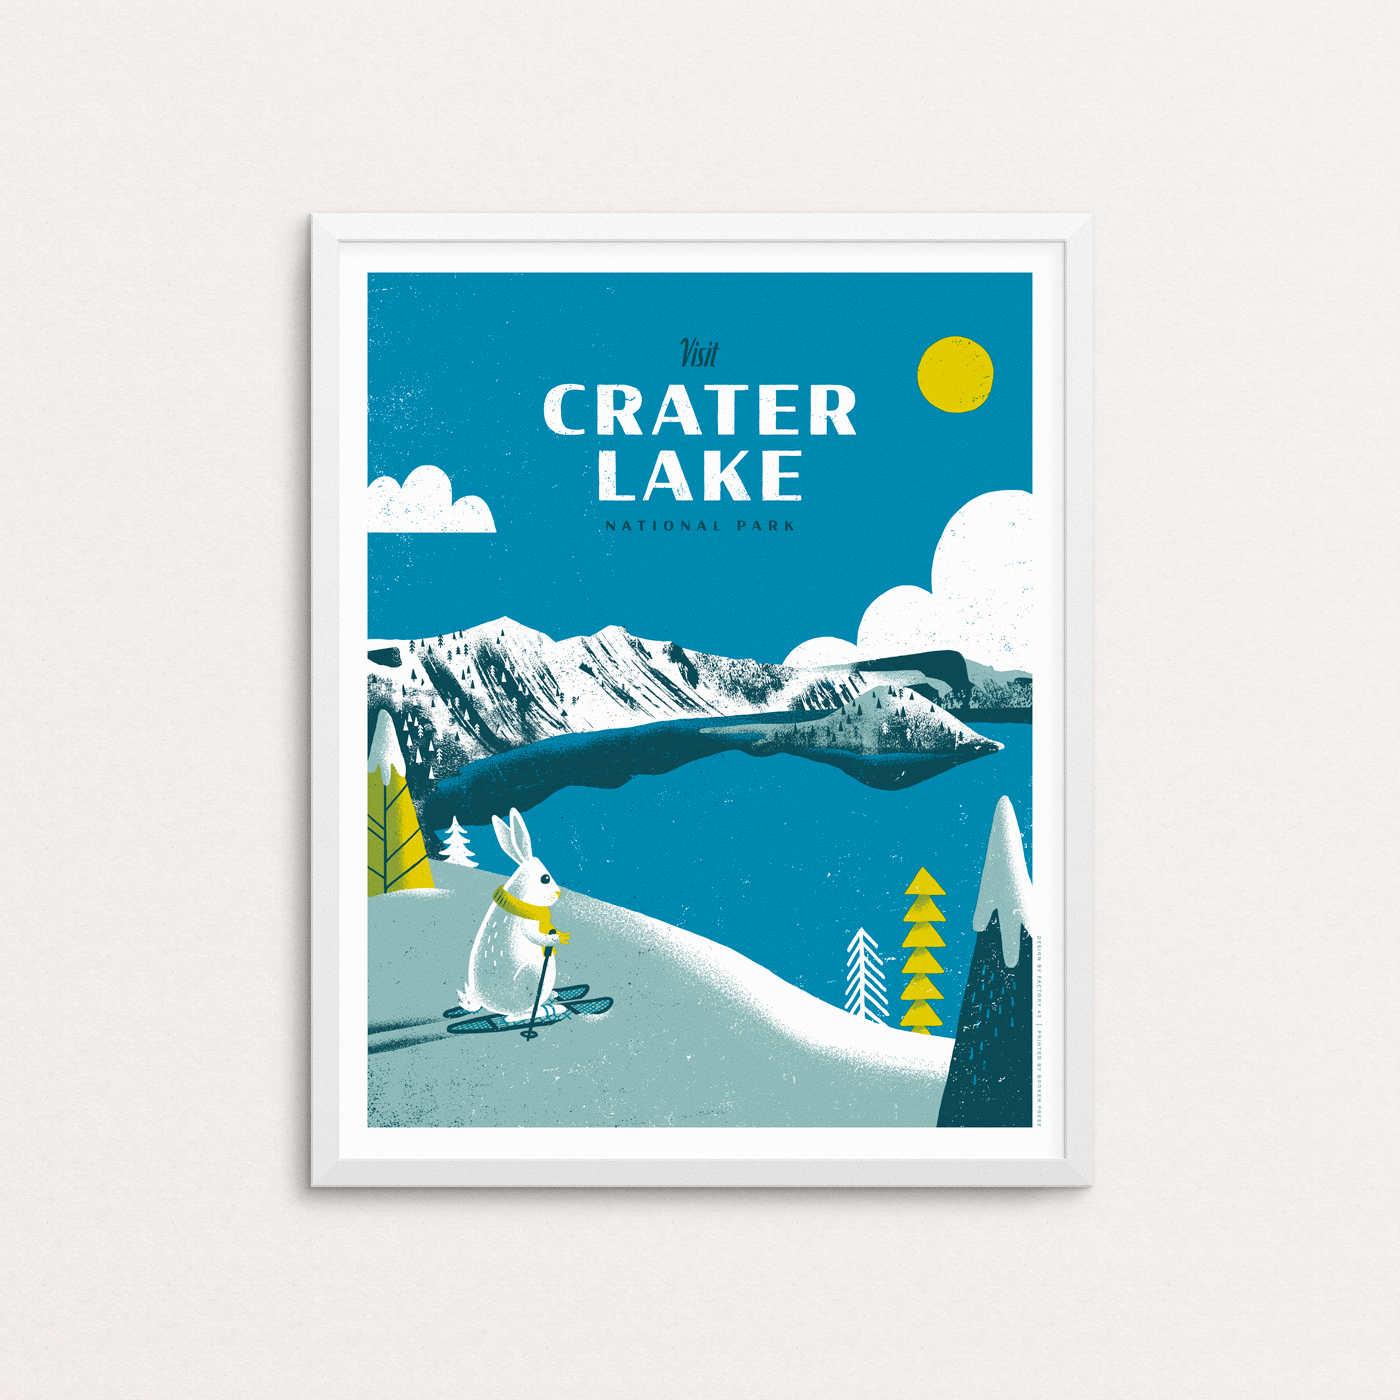 Crater Lake National Park showing a snow bunny skiing looking at Wizard Island. The Oregon caldera filled in when Mount Mazama collapsed. Photo show print in a white frame.